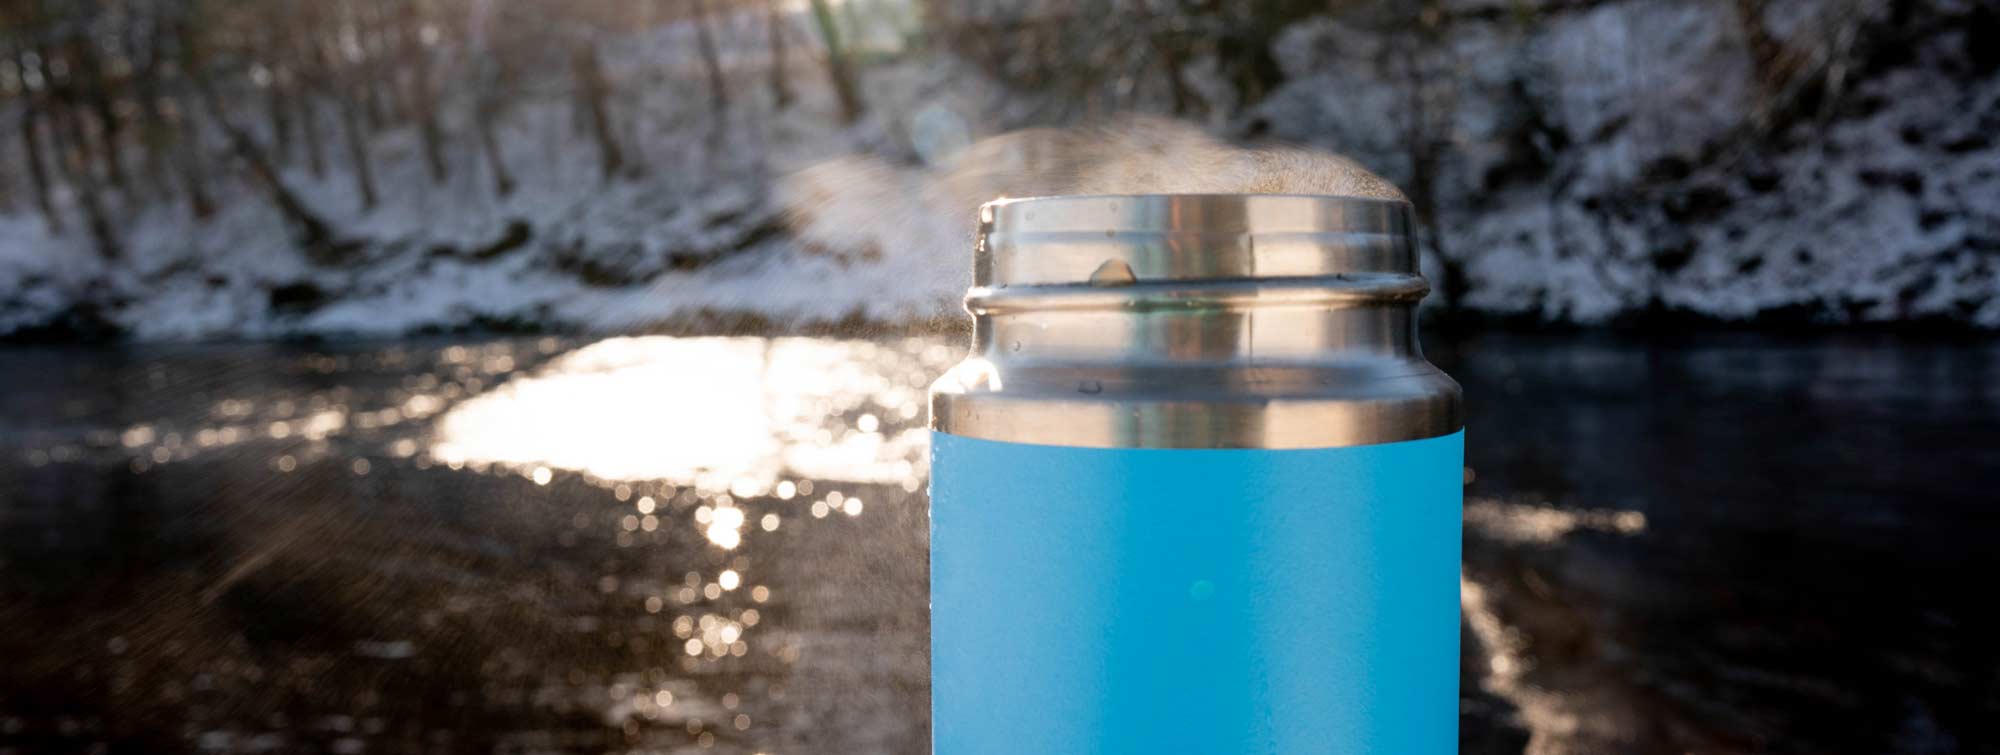 Keep your beer pint ice-cold for 4 hours straight with this nifty